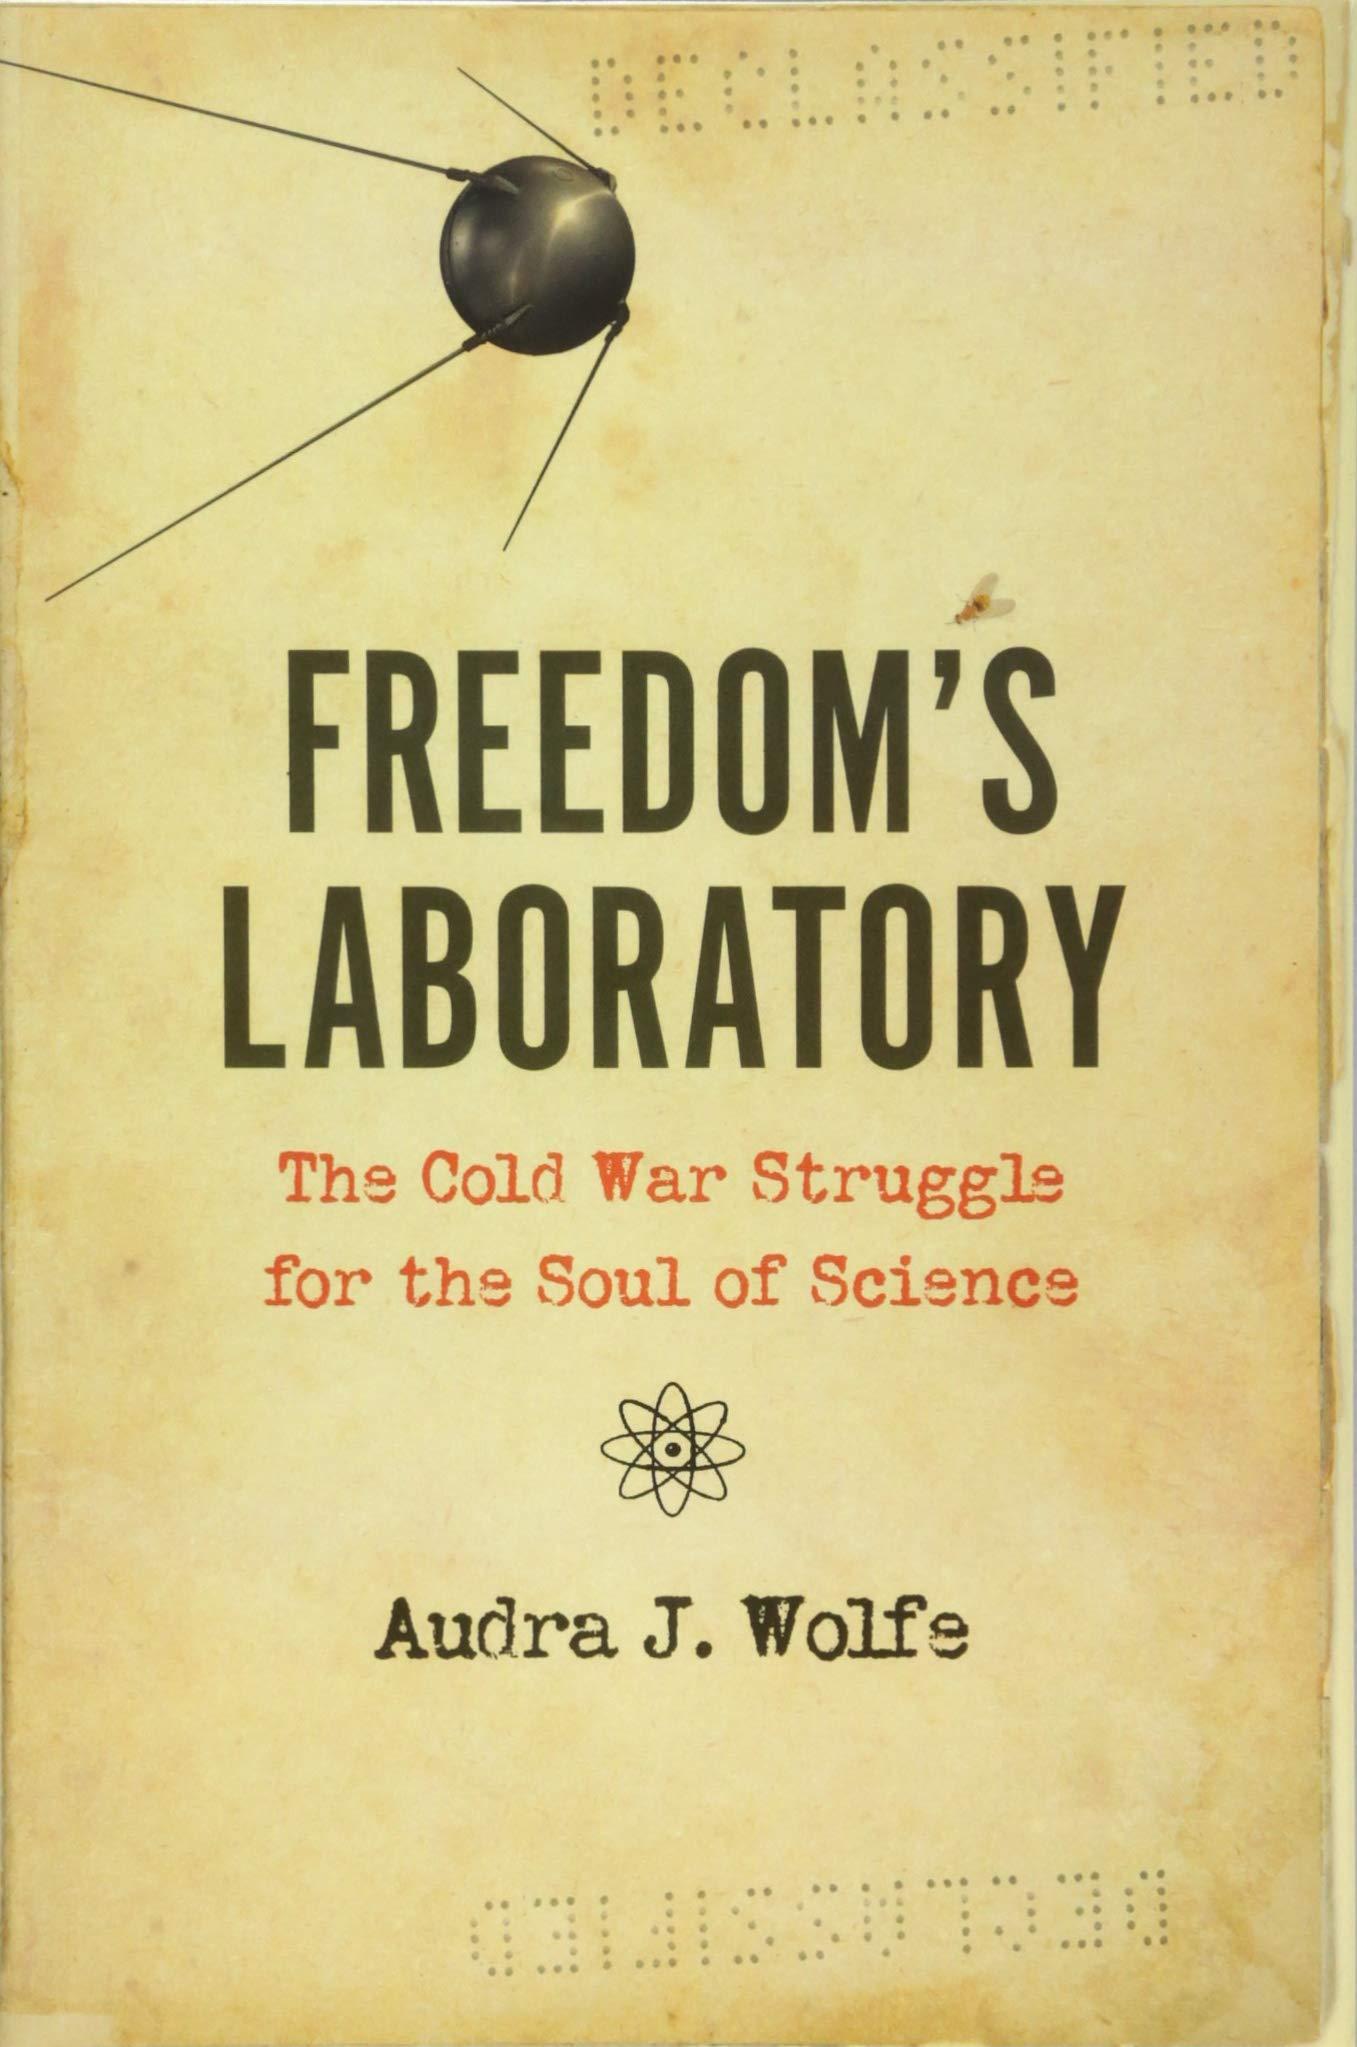 #1476: “How Science Won The Cold War”